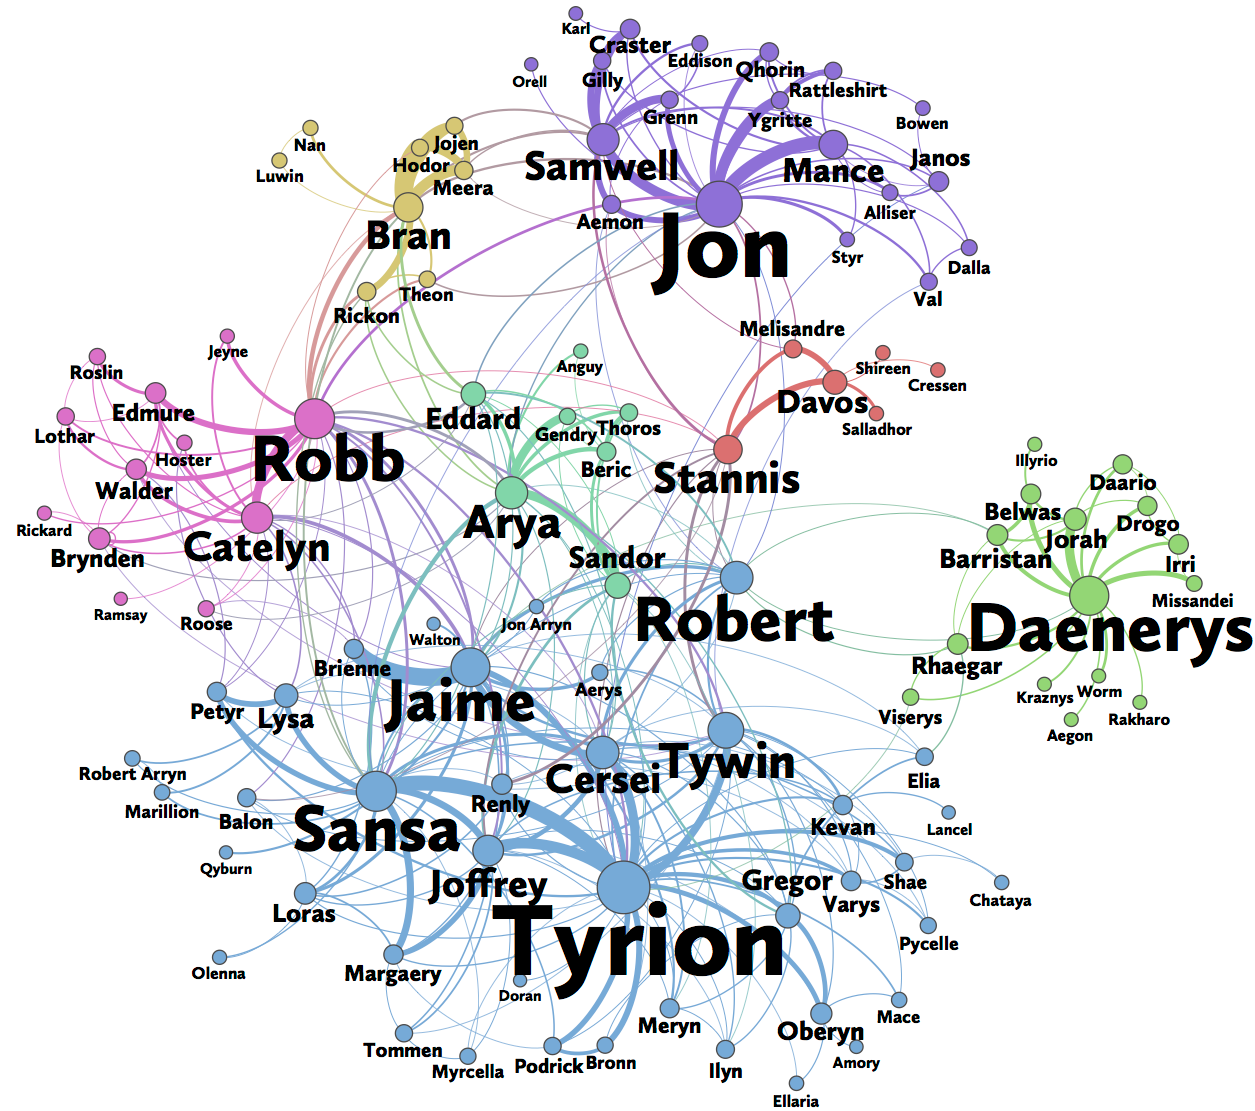 Social Network Analysis of Game of Thrones in Python